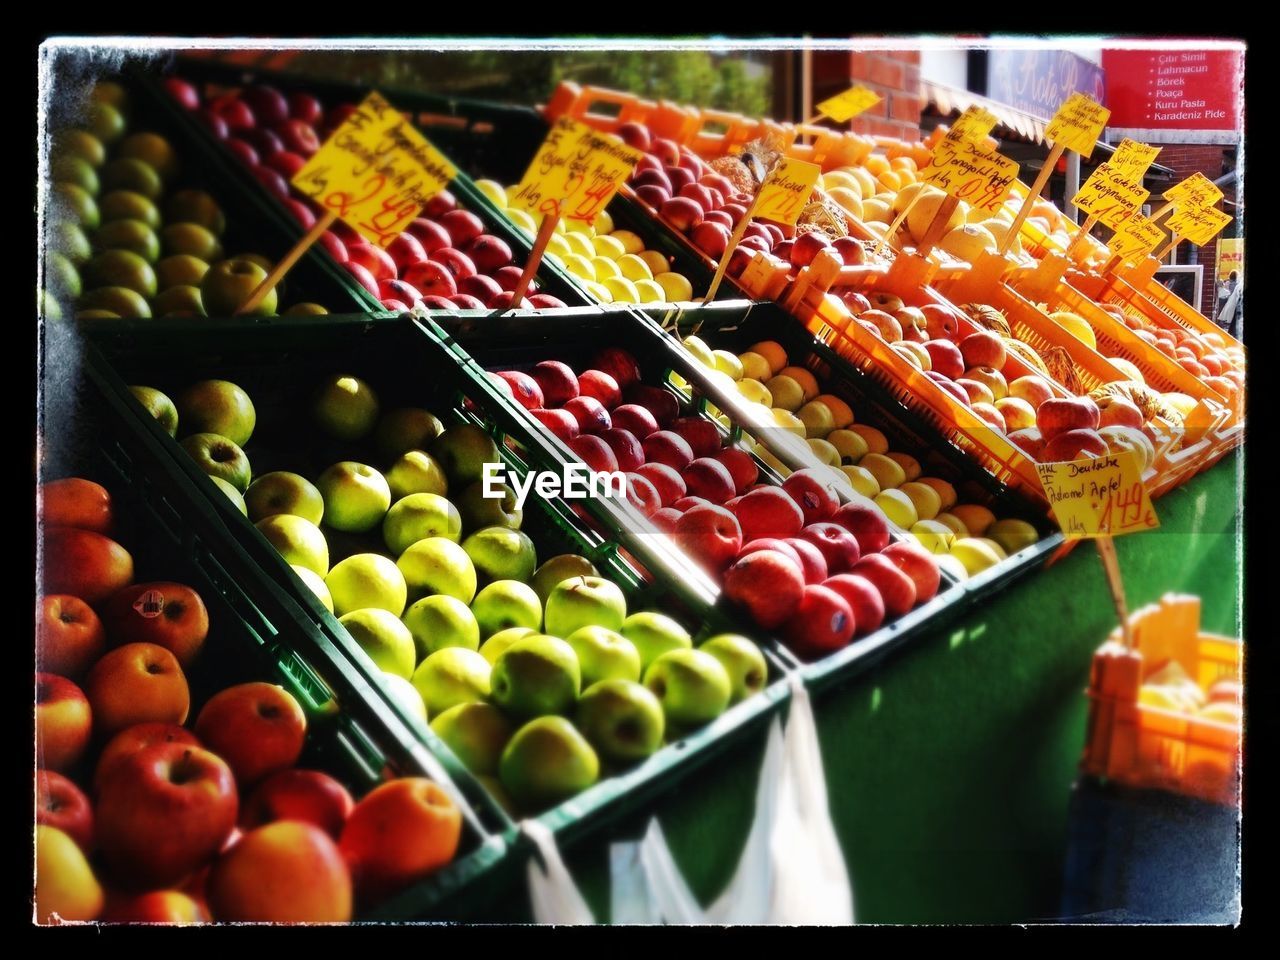 View of fruits for sale